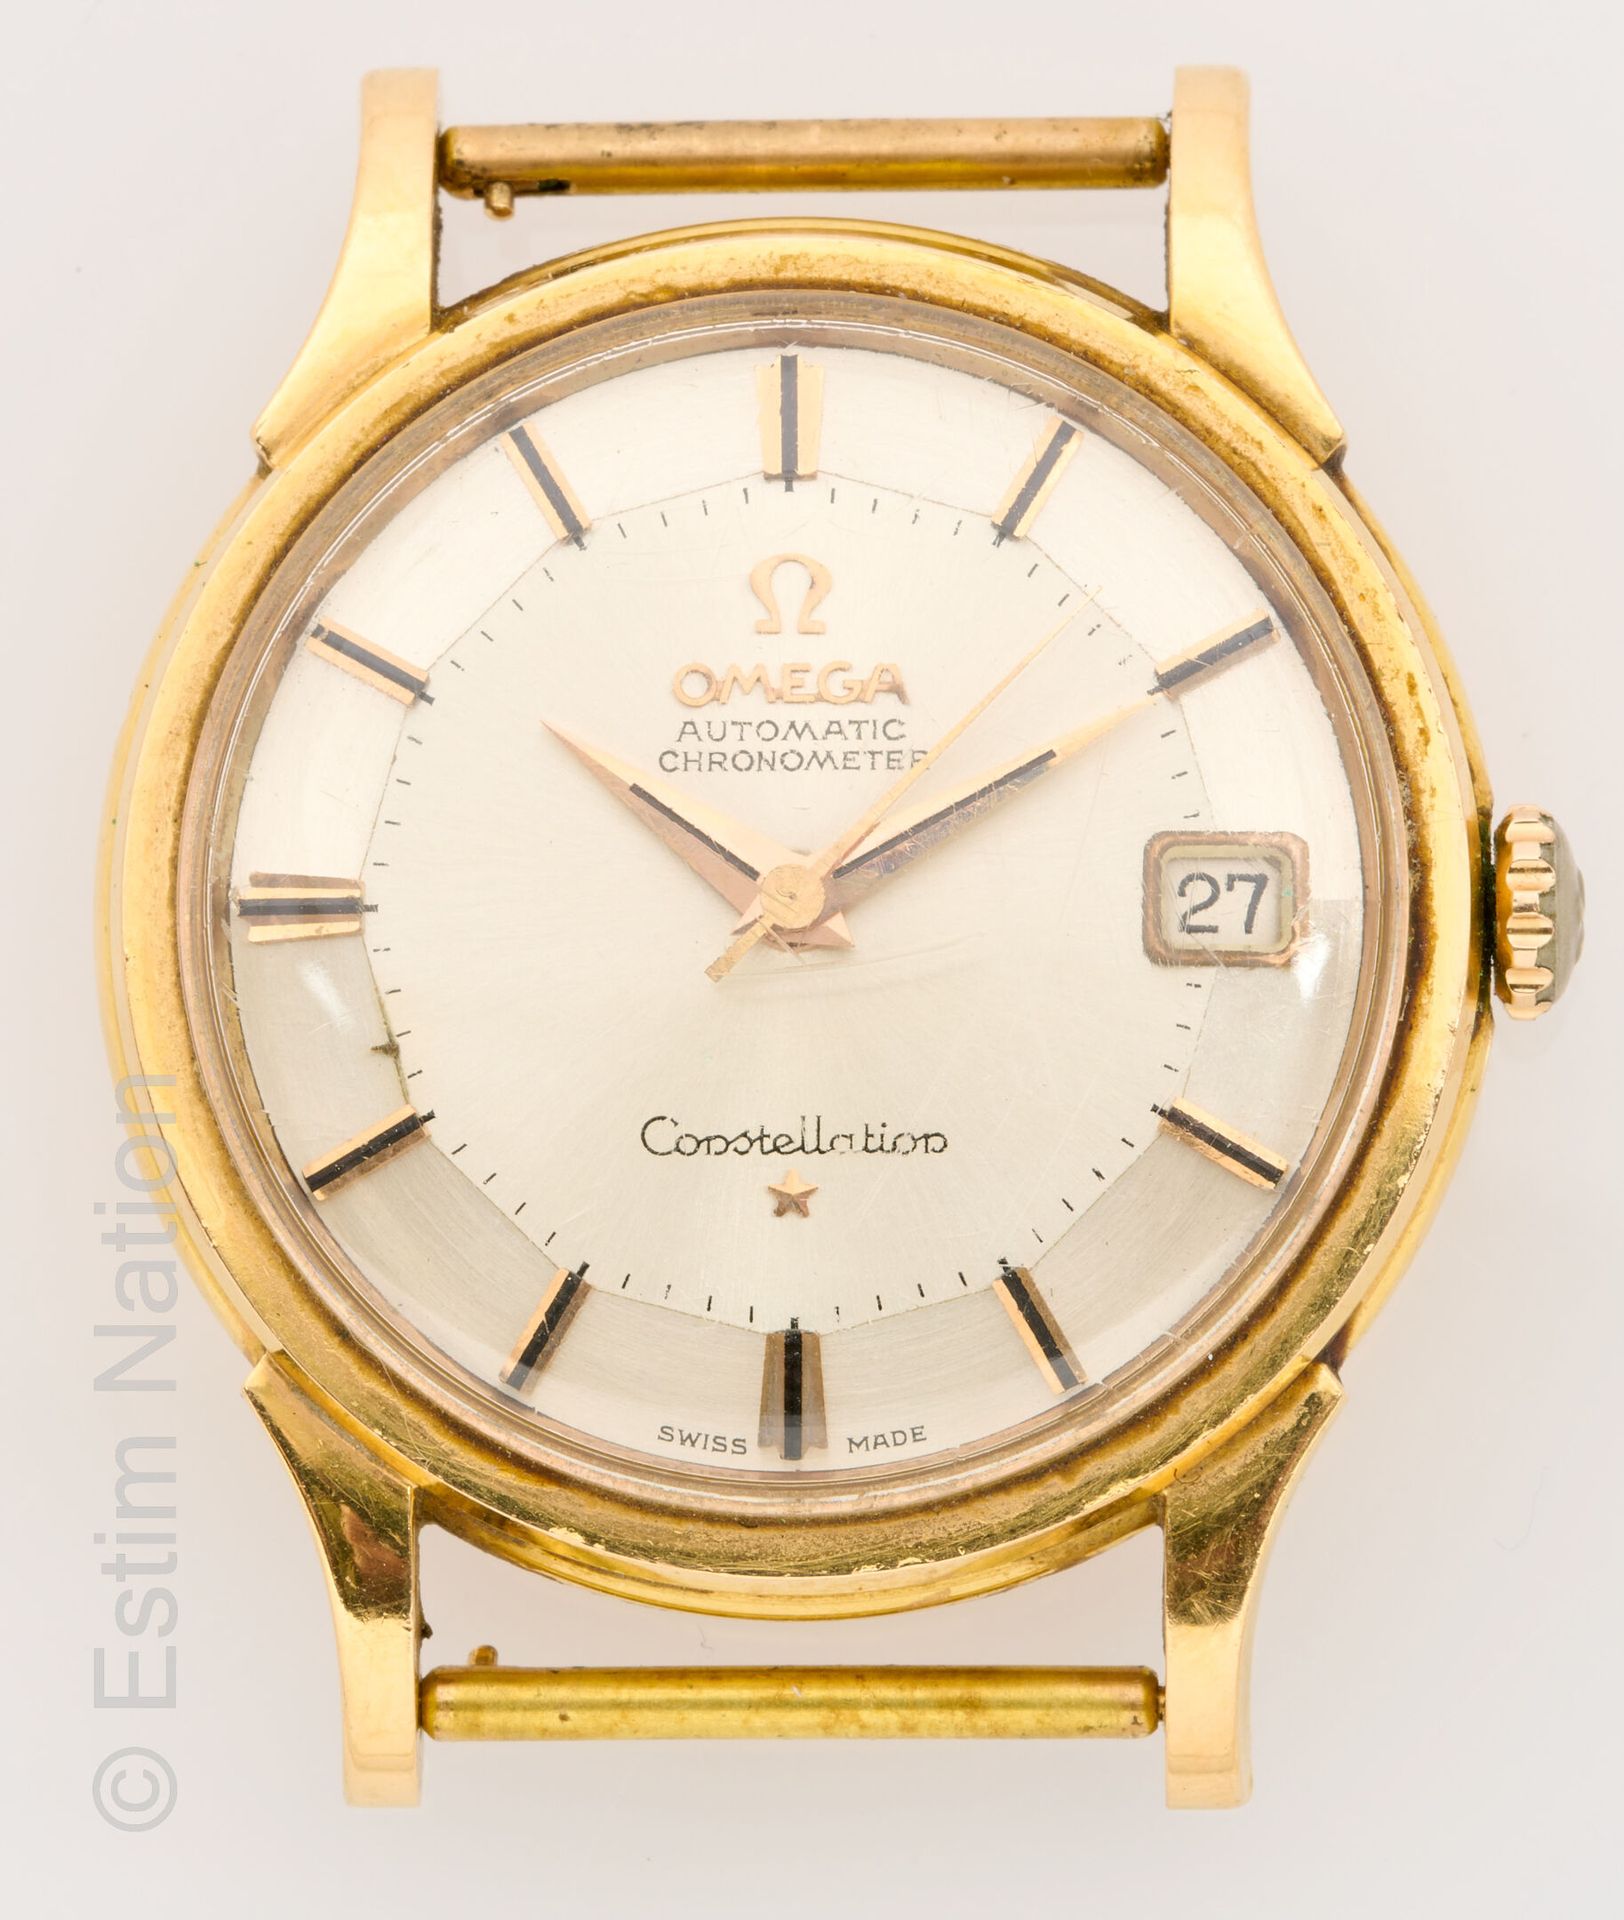 OMEGA OMEGA Constellation "Pie Pan
City watch in 18K yellow gold 750 thousandths&hellip;